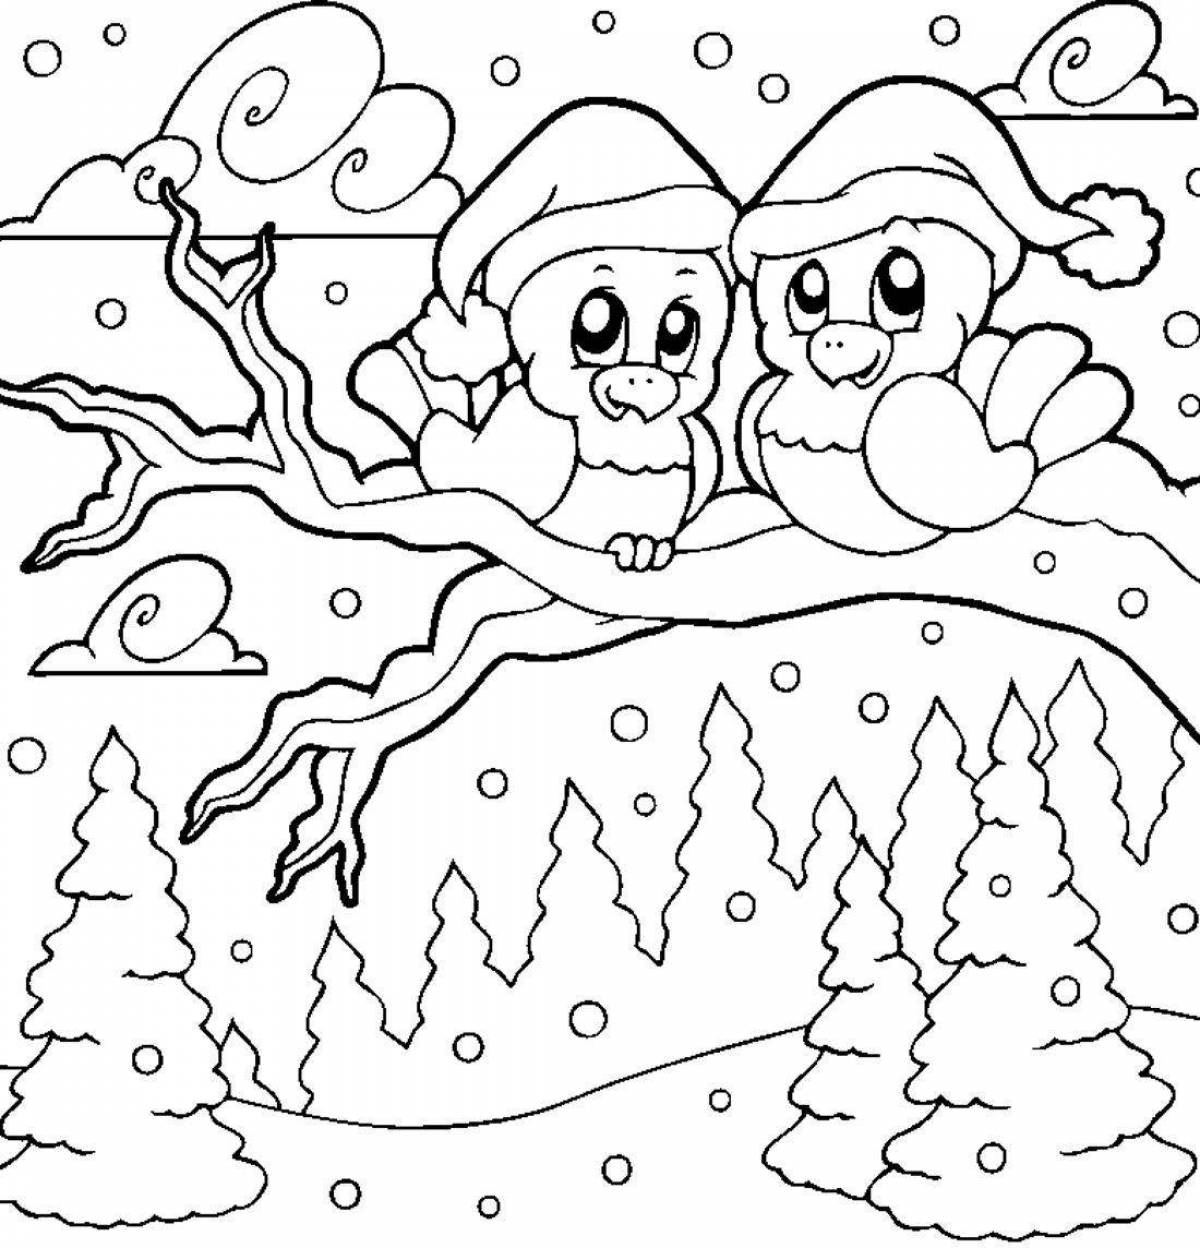 Coloring book dreamy winter in the forest